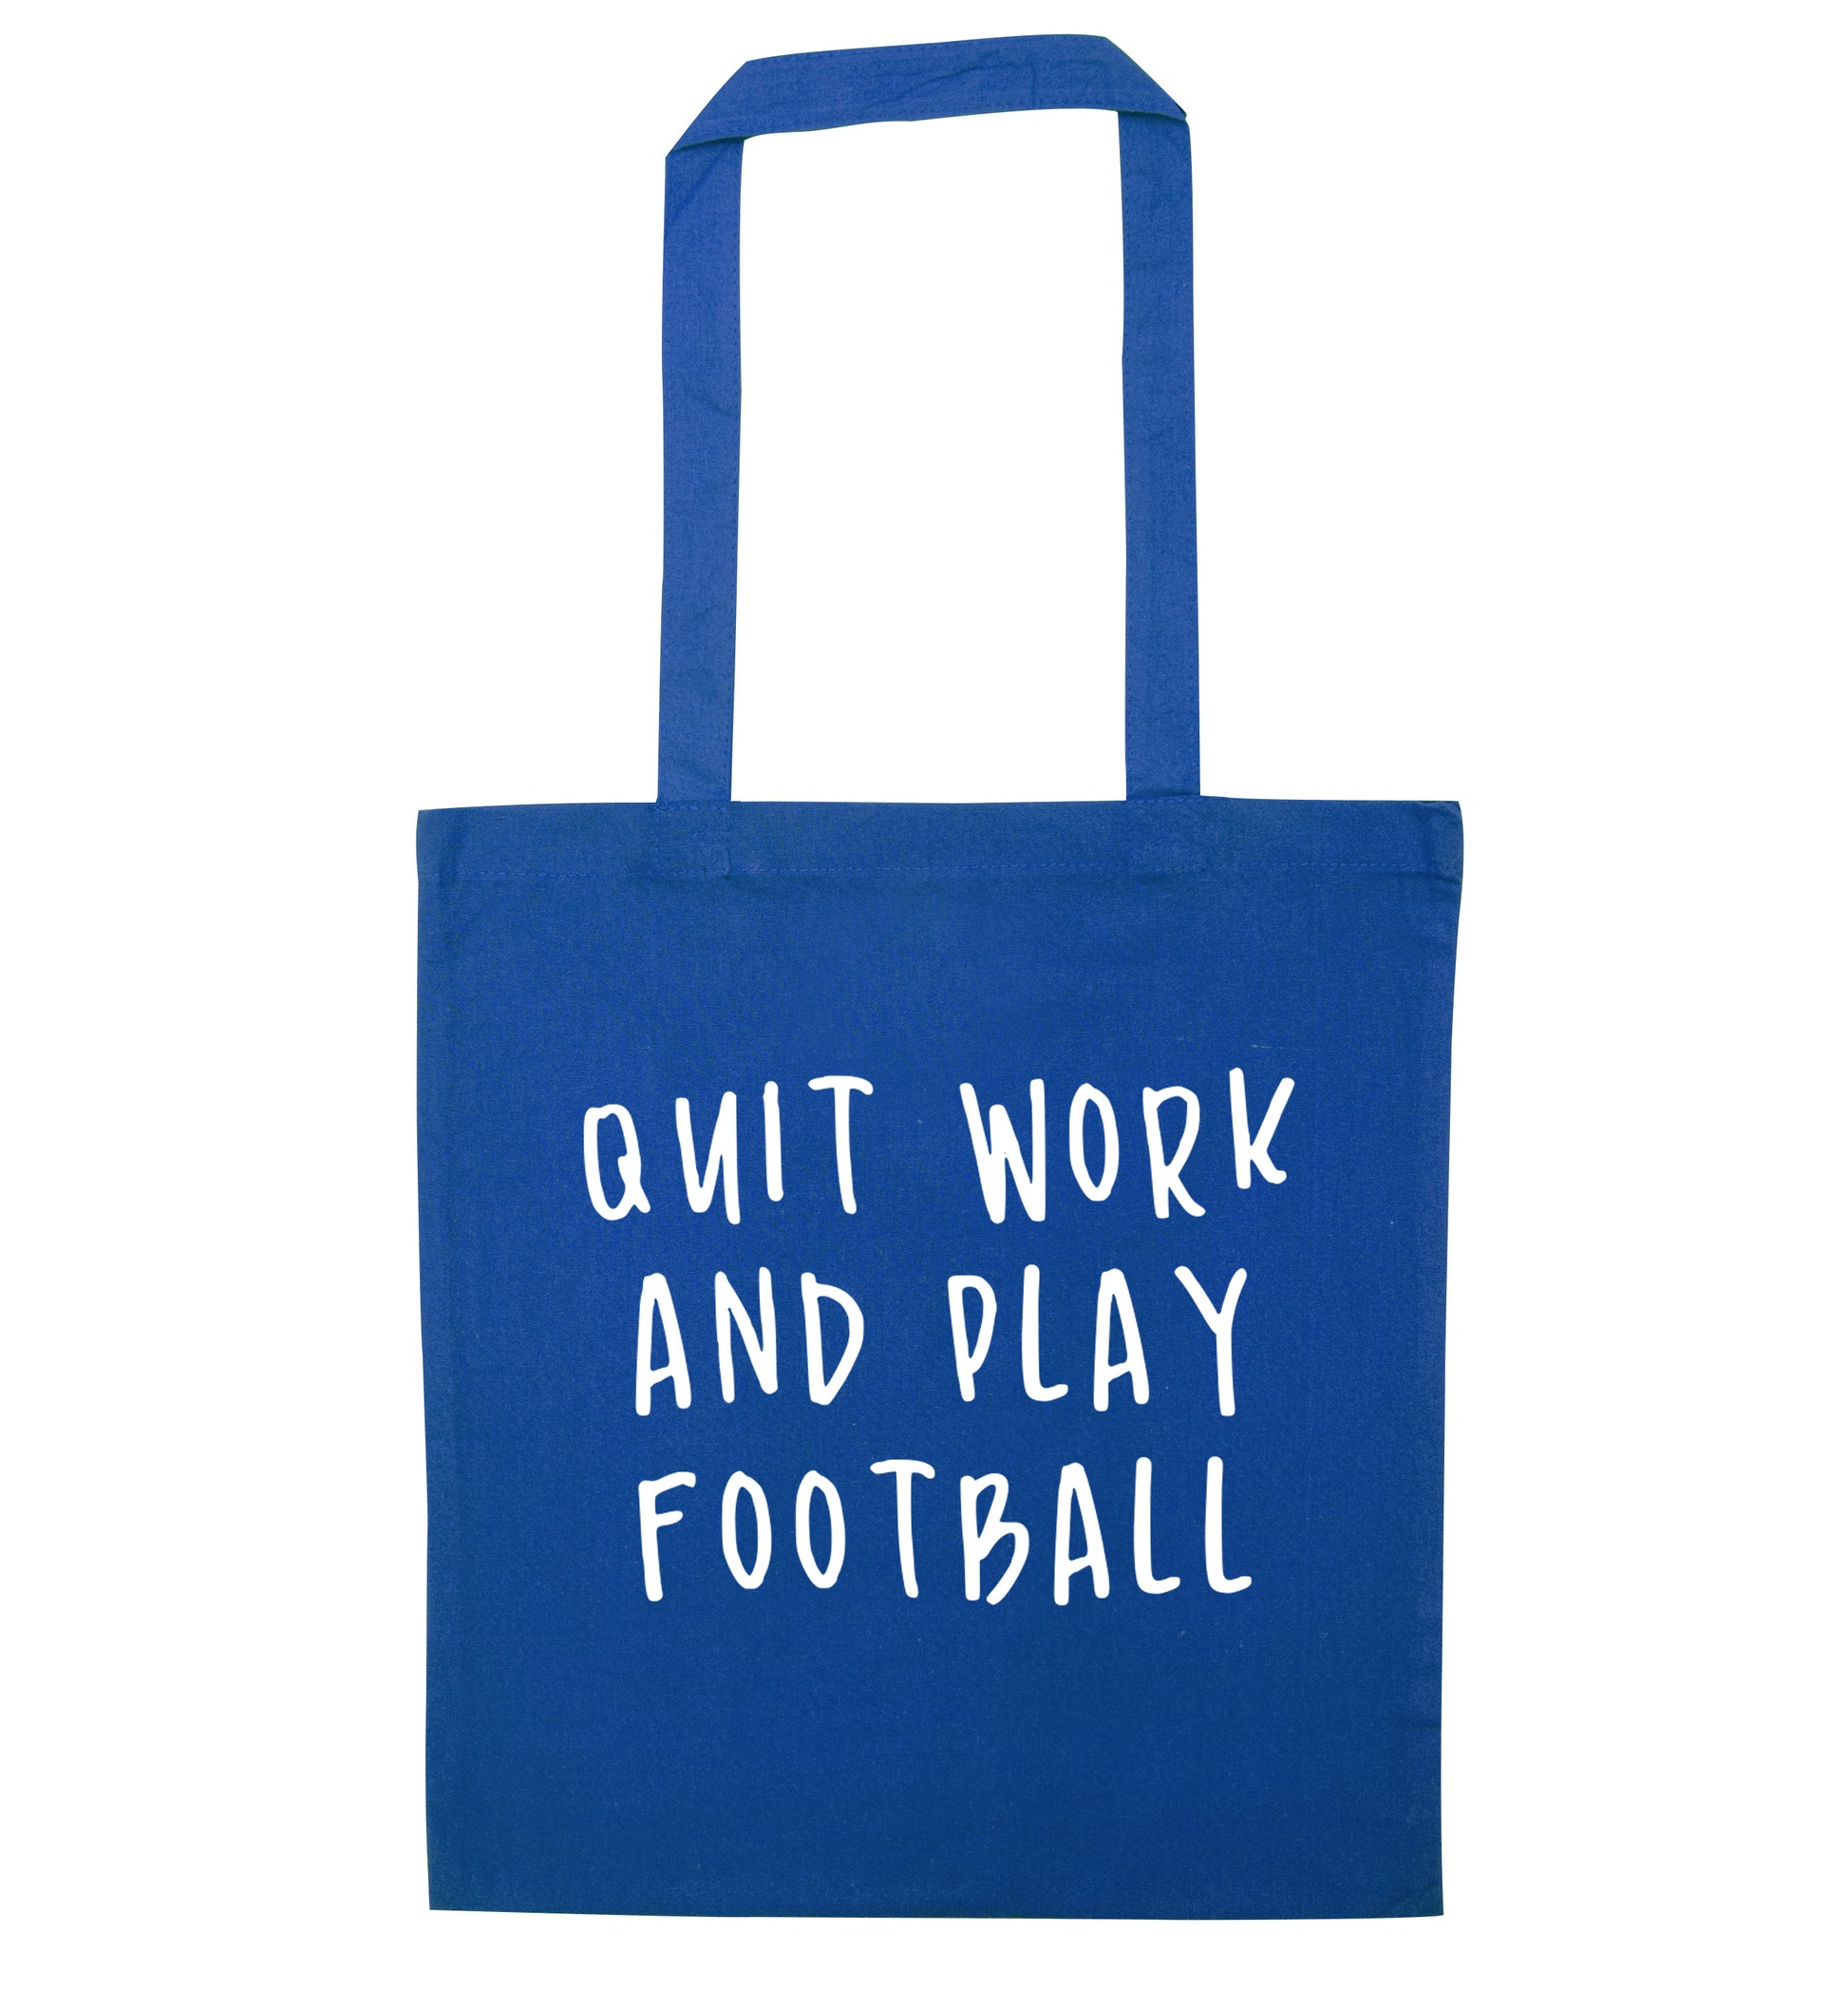 Quit work play football blue tote bag